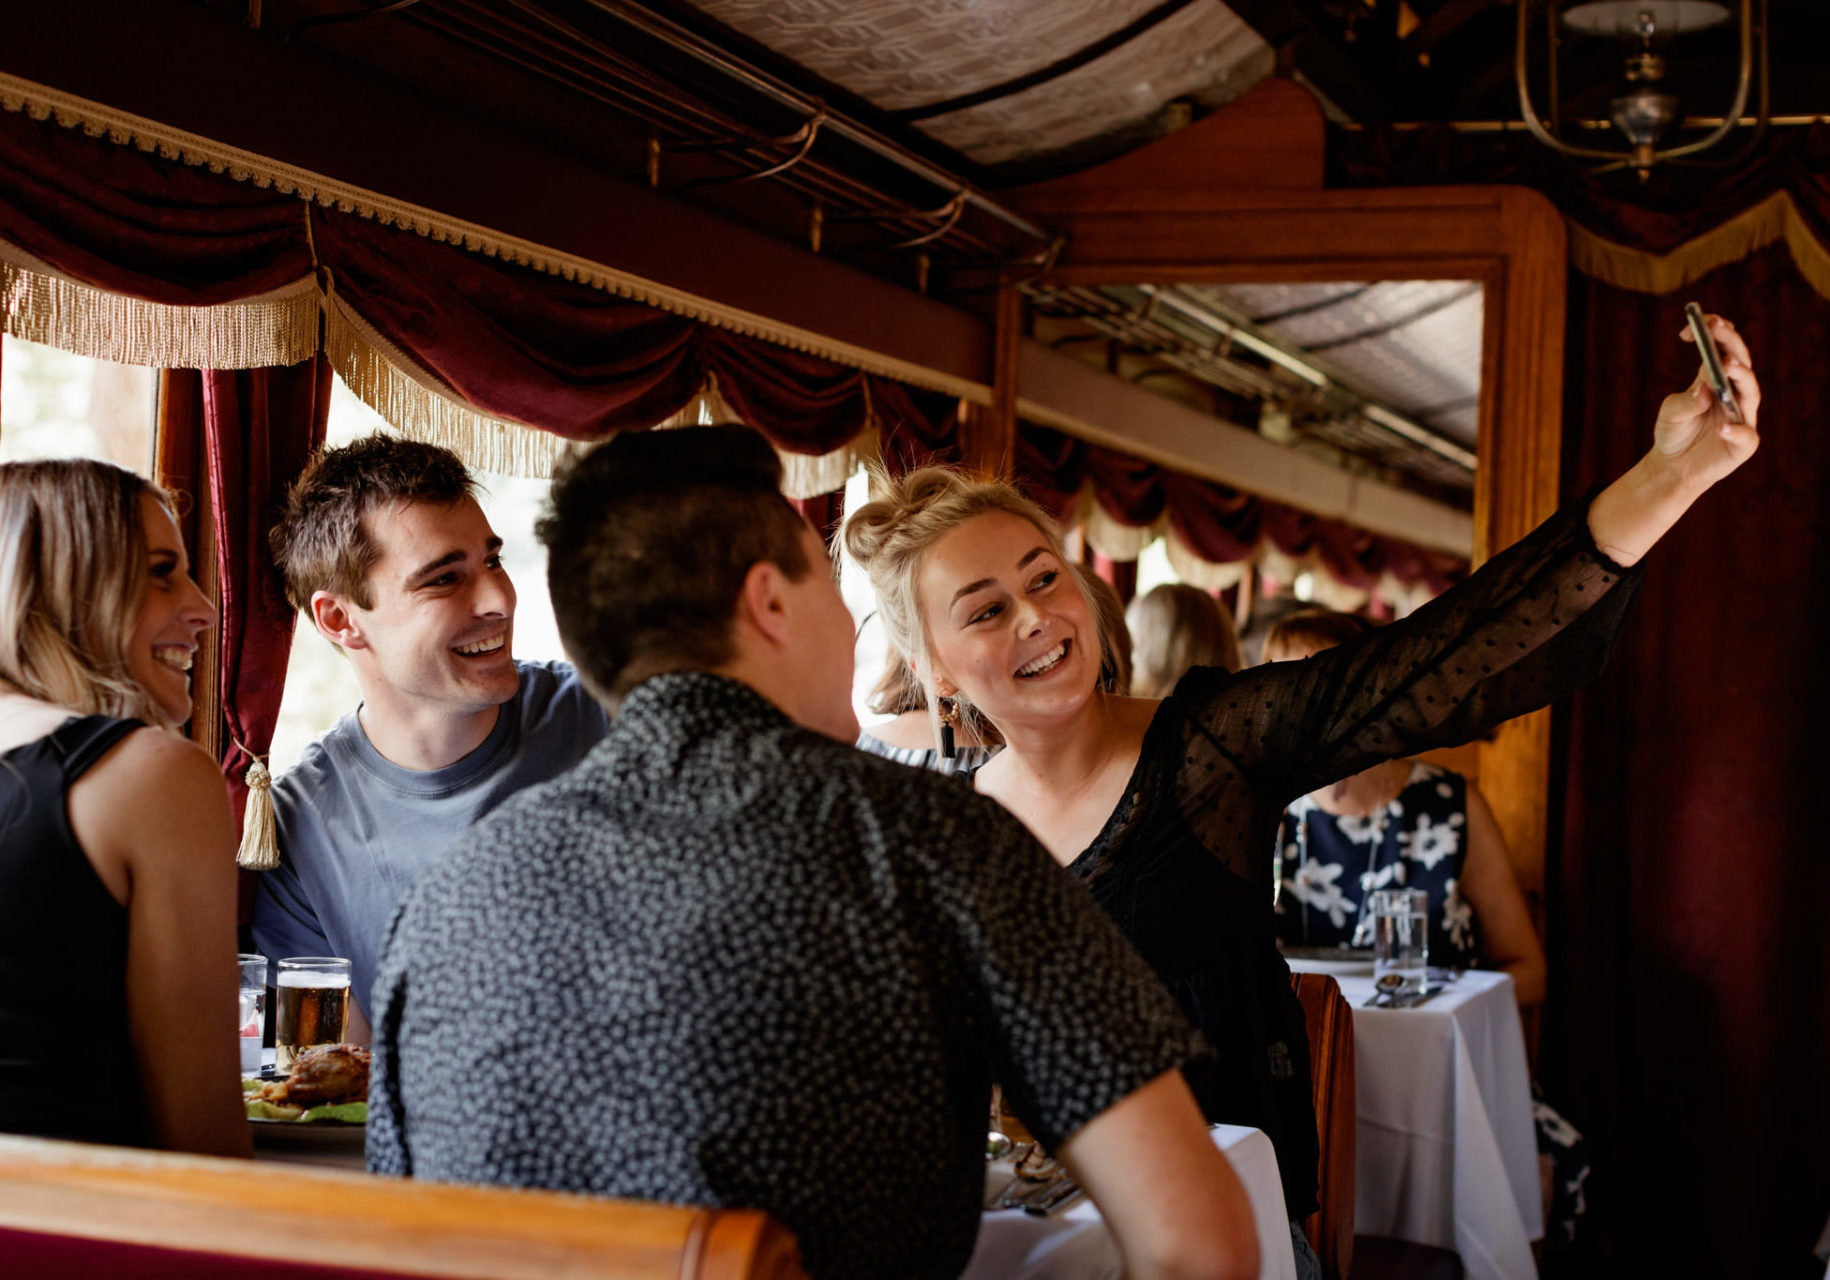 Young Couples Taking Selfie On Board Luncheon Train